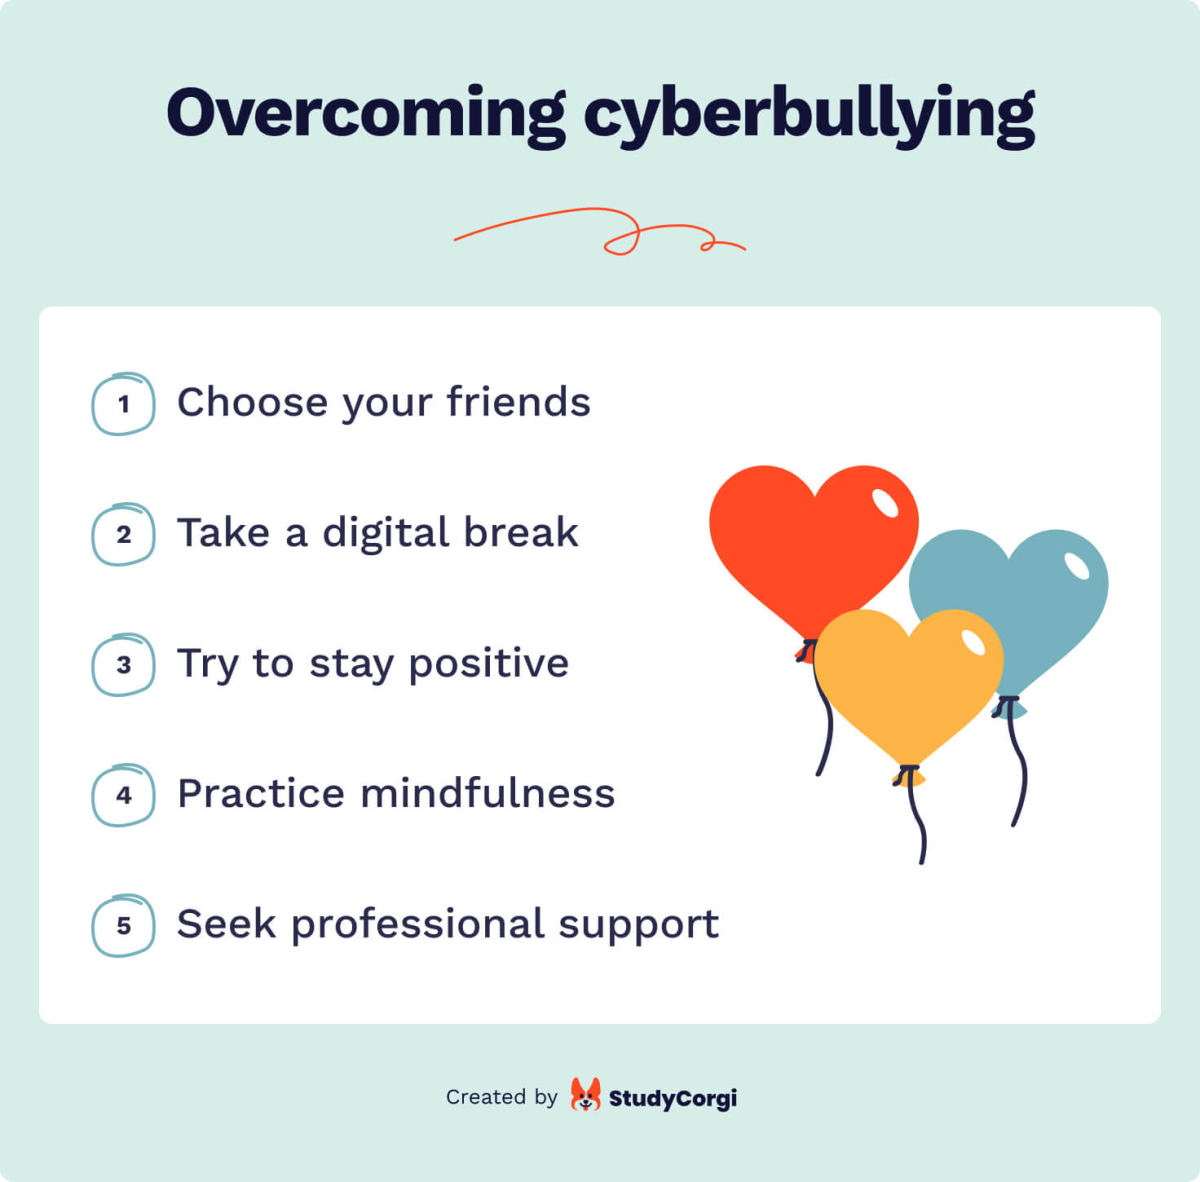 The picture lists 5 tips on reacting to cyberbullying.